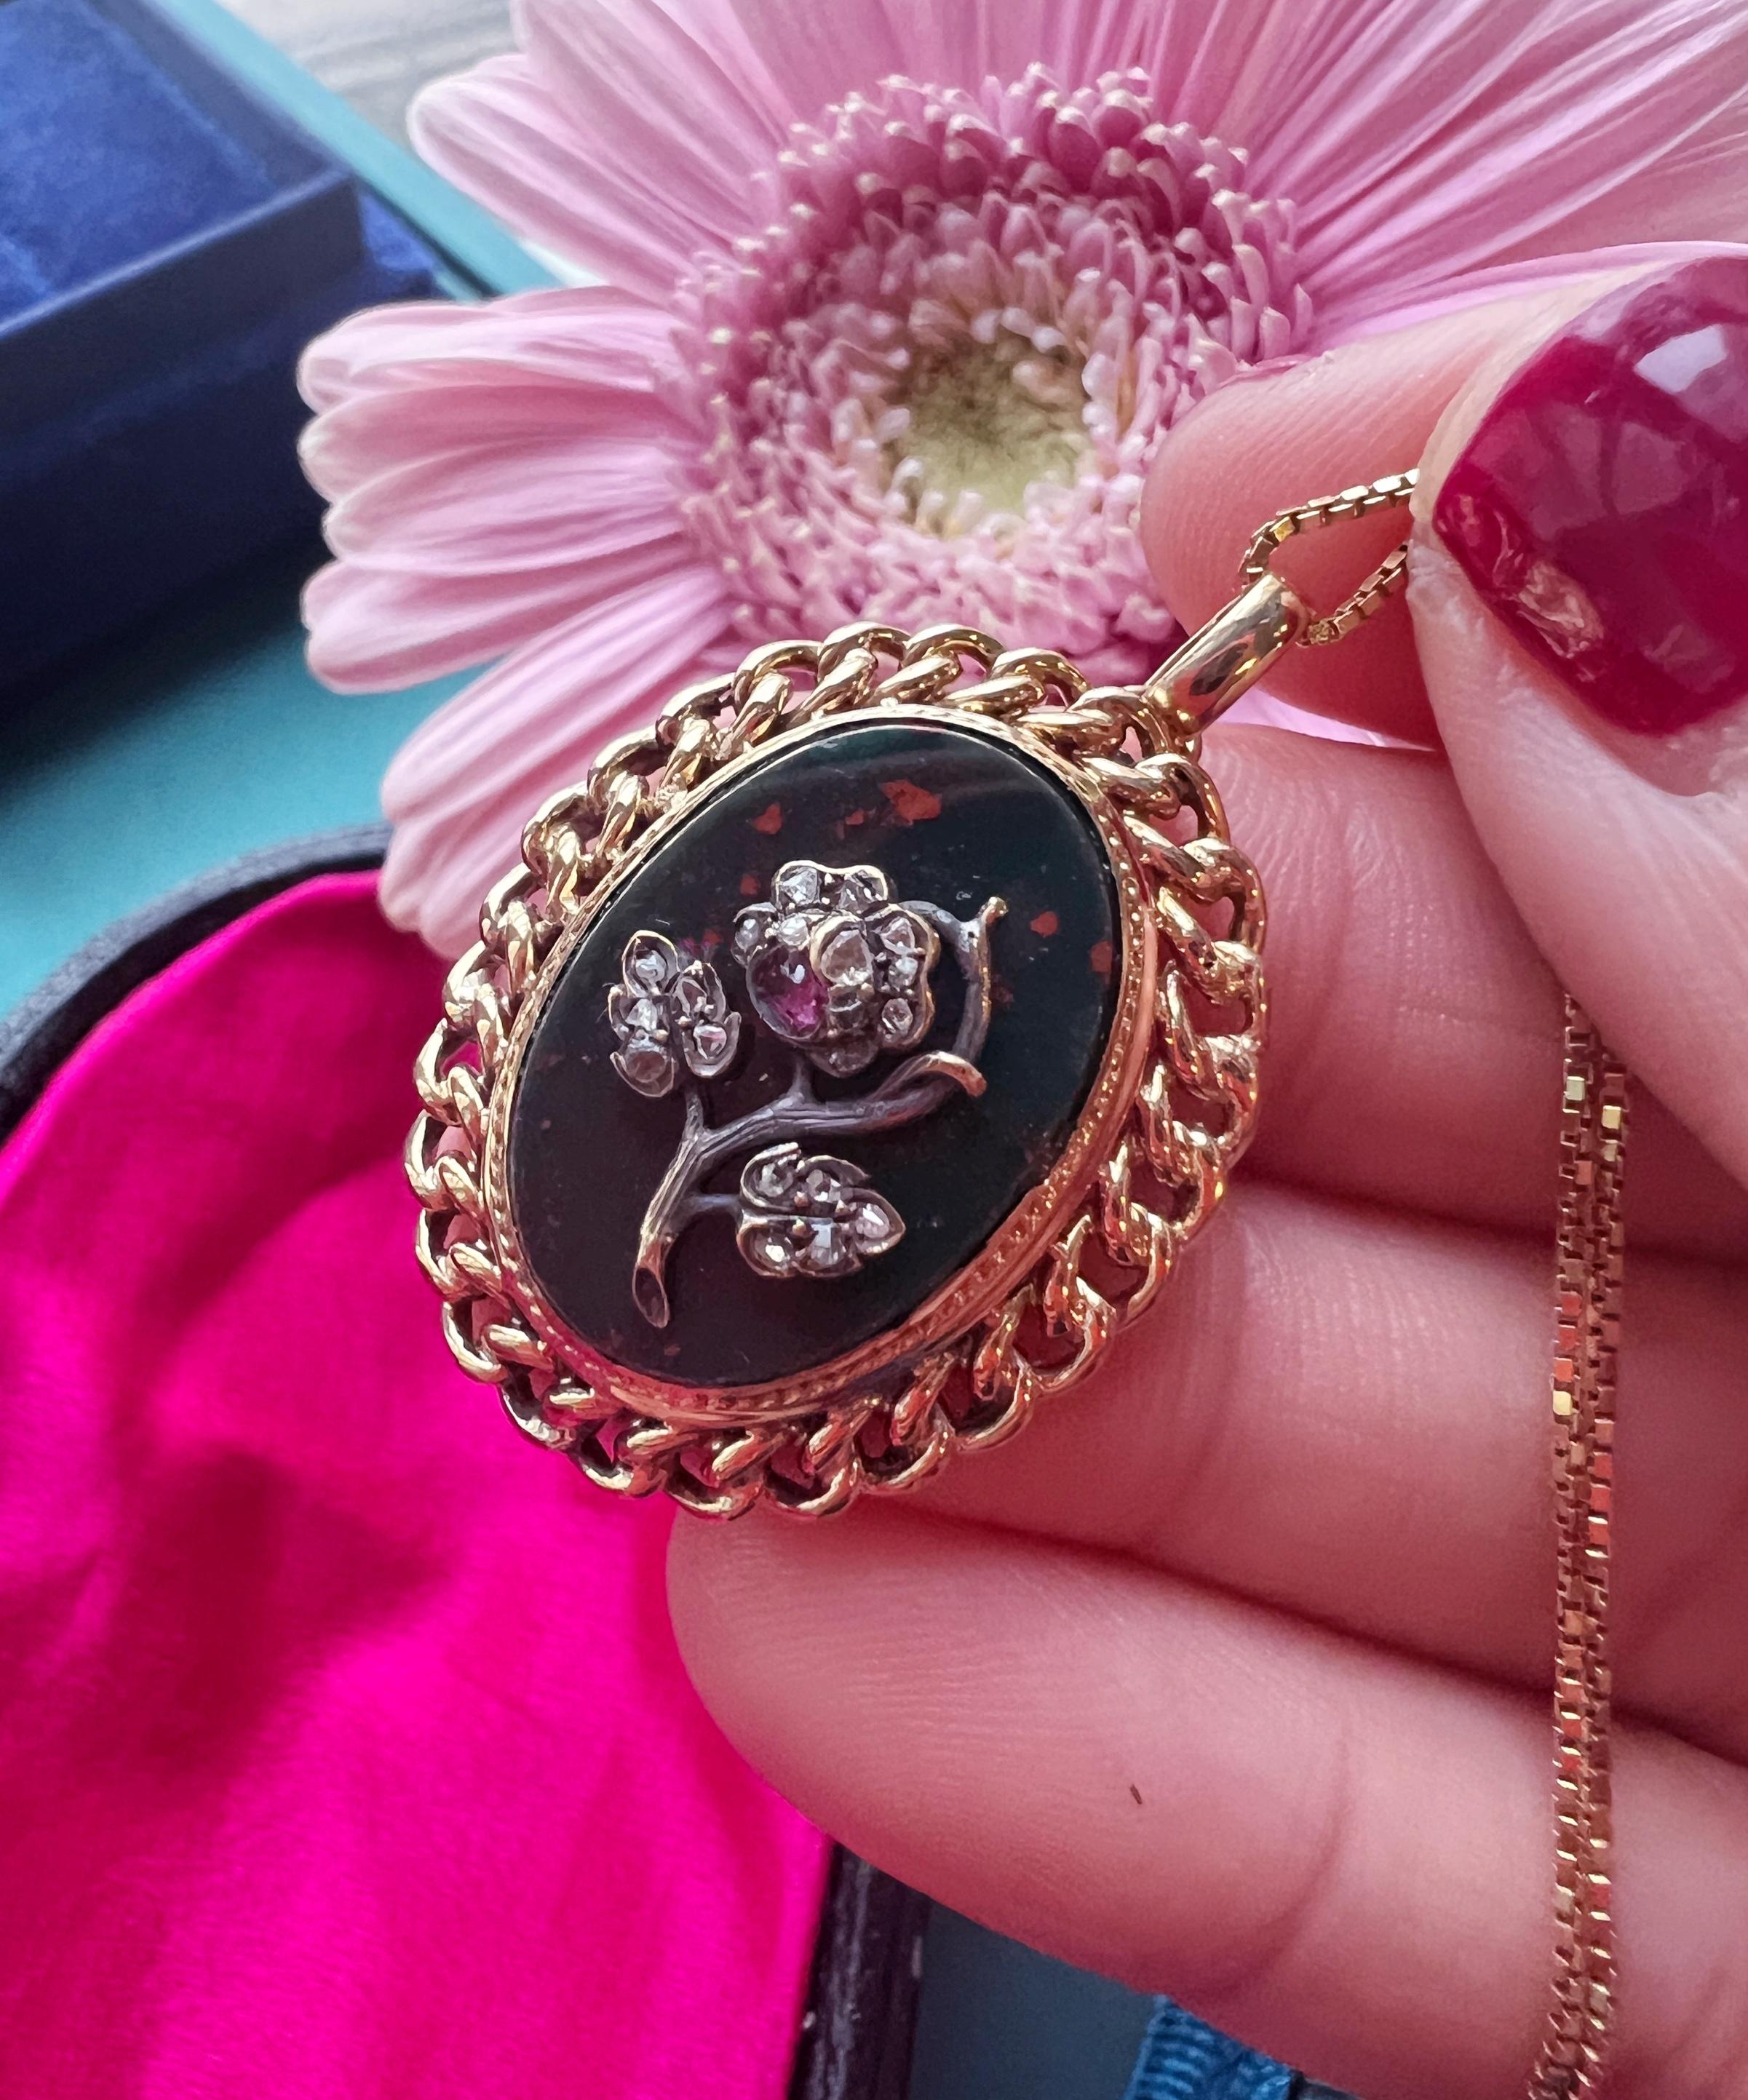 For sale a large 18K gold pendant featuring a rose flower entirely decorated with rose cut diamonds. There is a purplish red ruby in the center. The flower is piqué set on an oval-shaped, bloodstone panel, which conveys a deep green color with